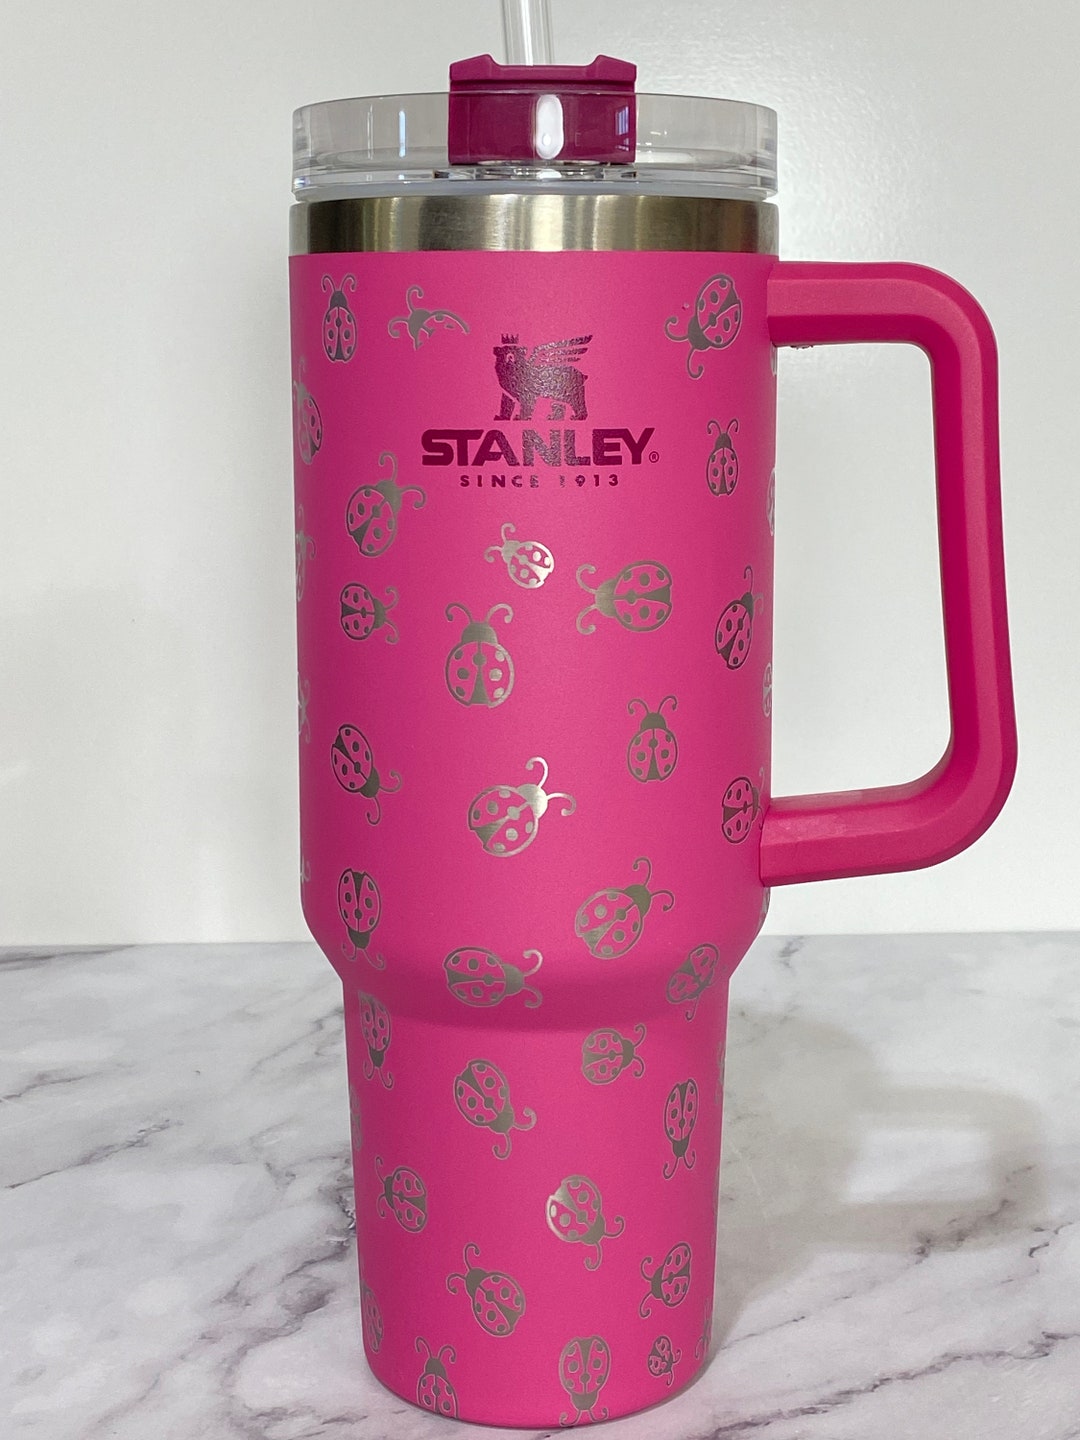 Must Have: Barbie Pink Stanley Quencher - Stylish Stanley Tumbler -  Pink Barbie Citron Dye Tie